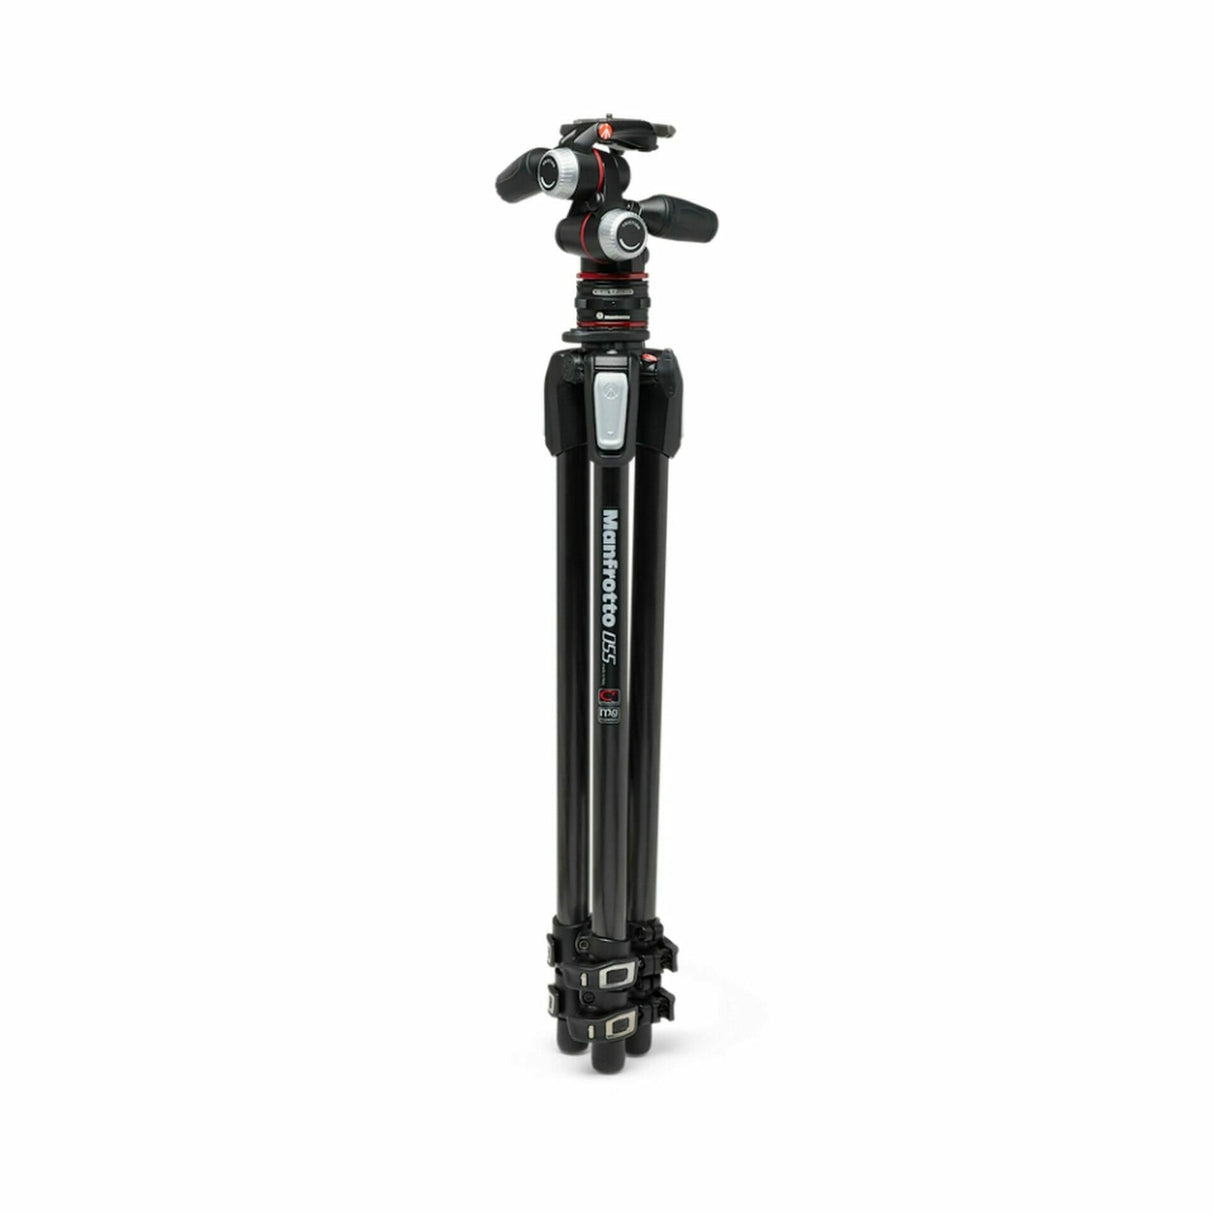 Manfrotto MK055CXPRO33WQR Carbon 3-Section Tripod with 3-Way Head and MOVE